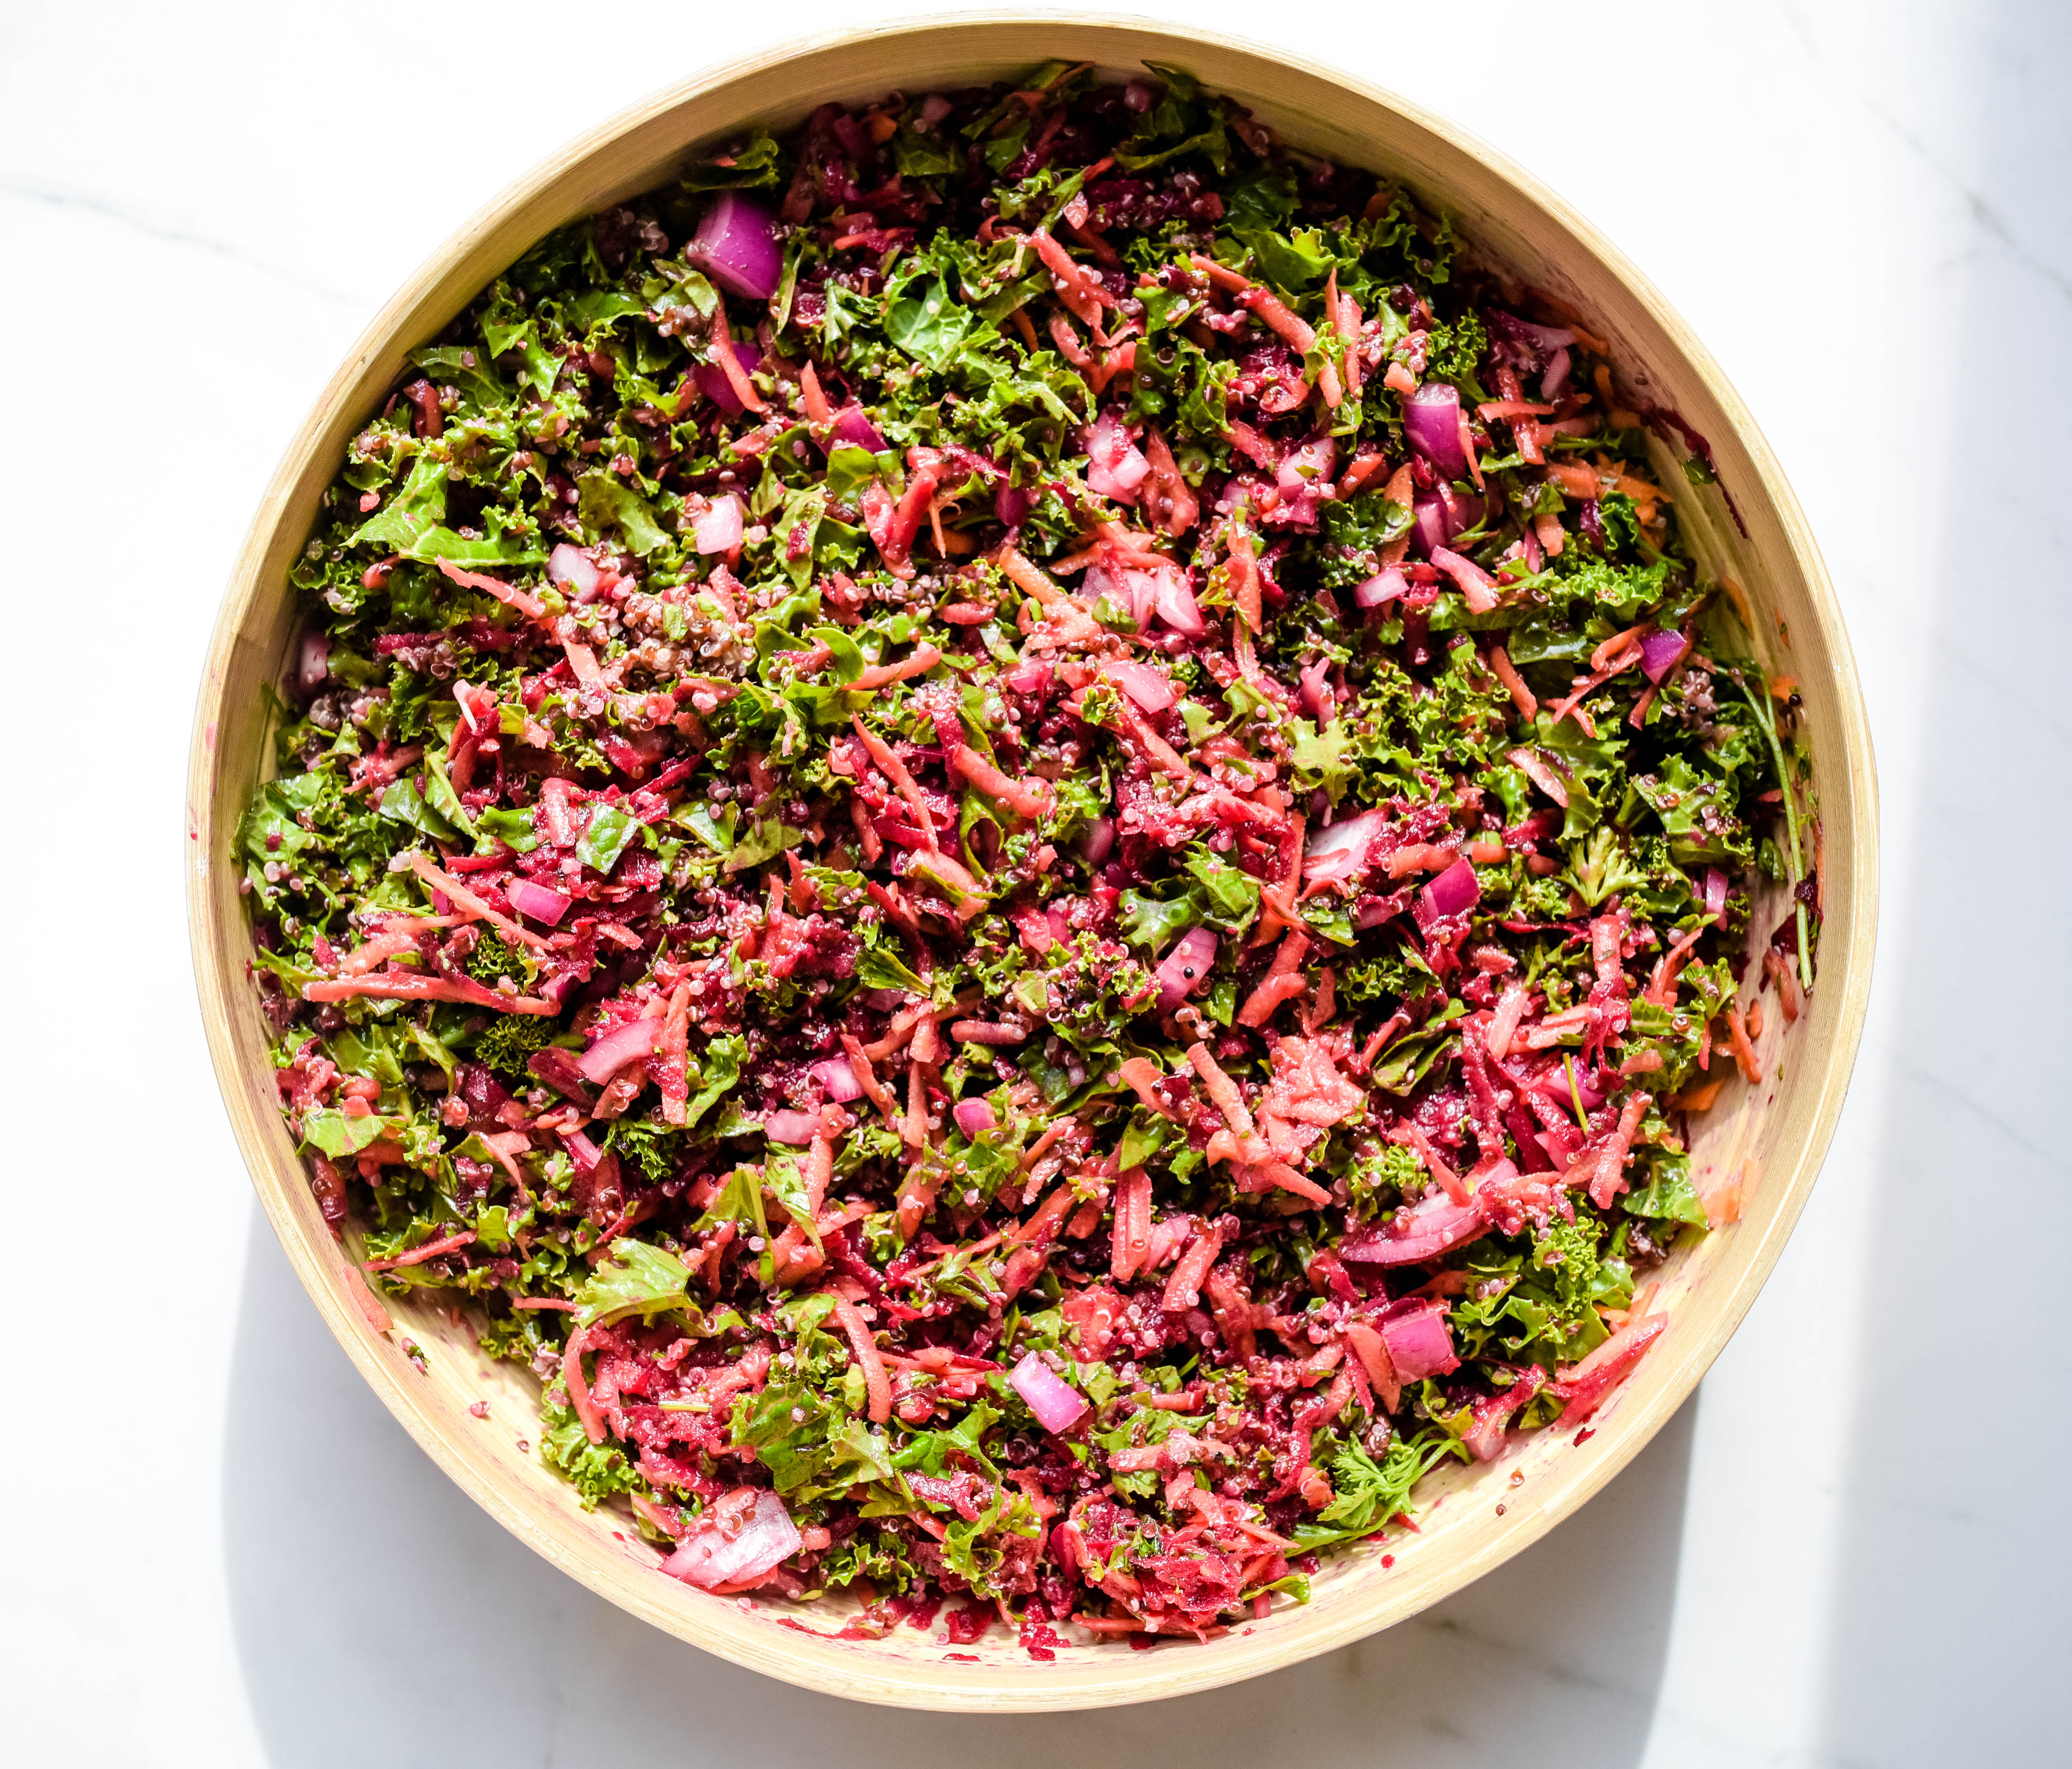 SHREDDED BEET, CARROT AND KALE SALAD recipe